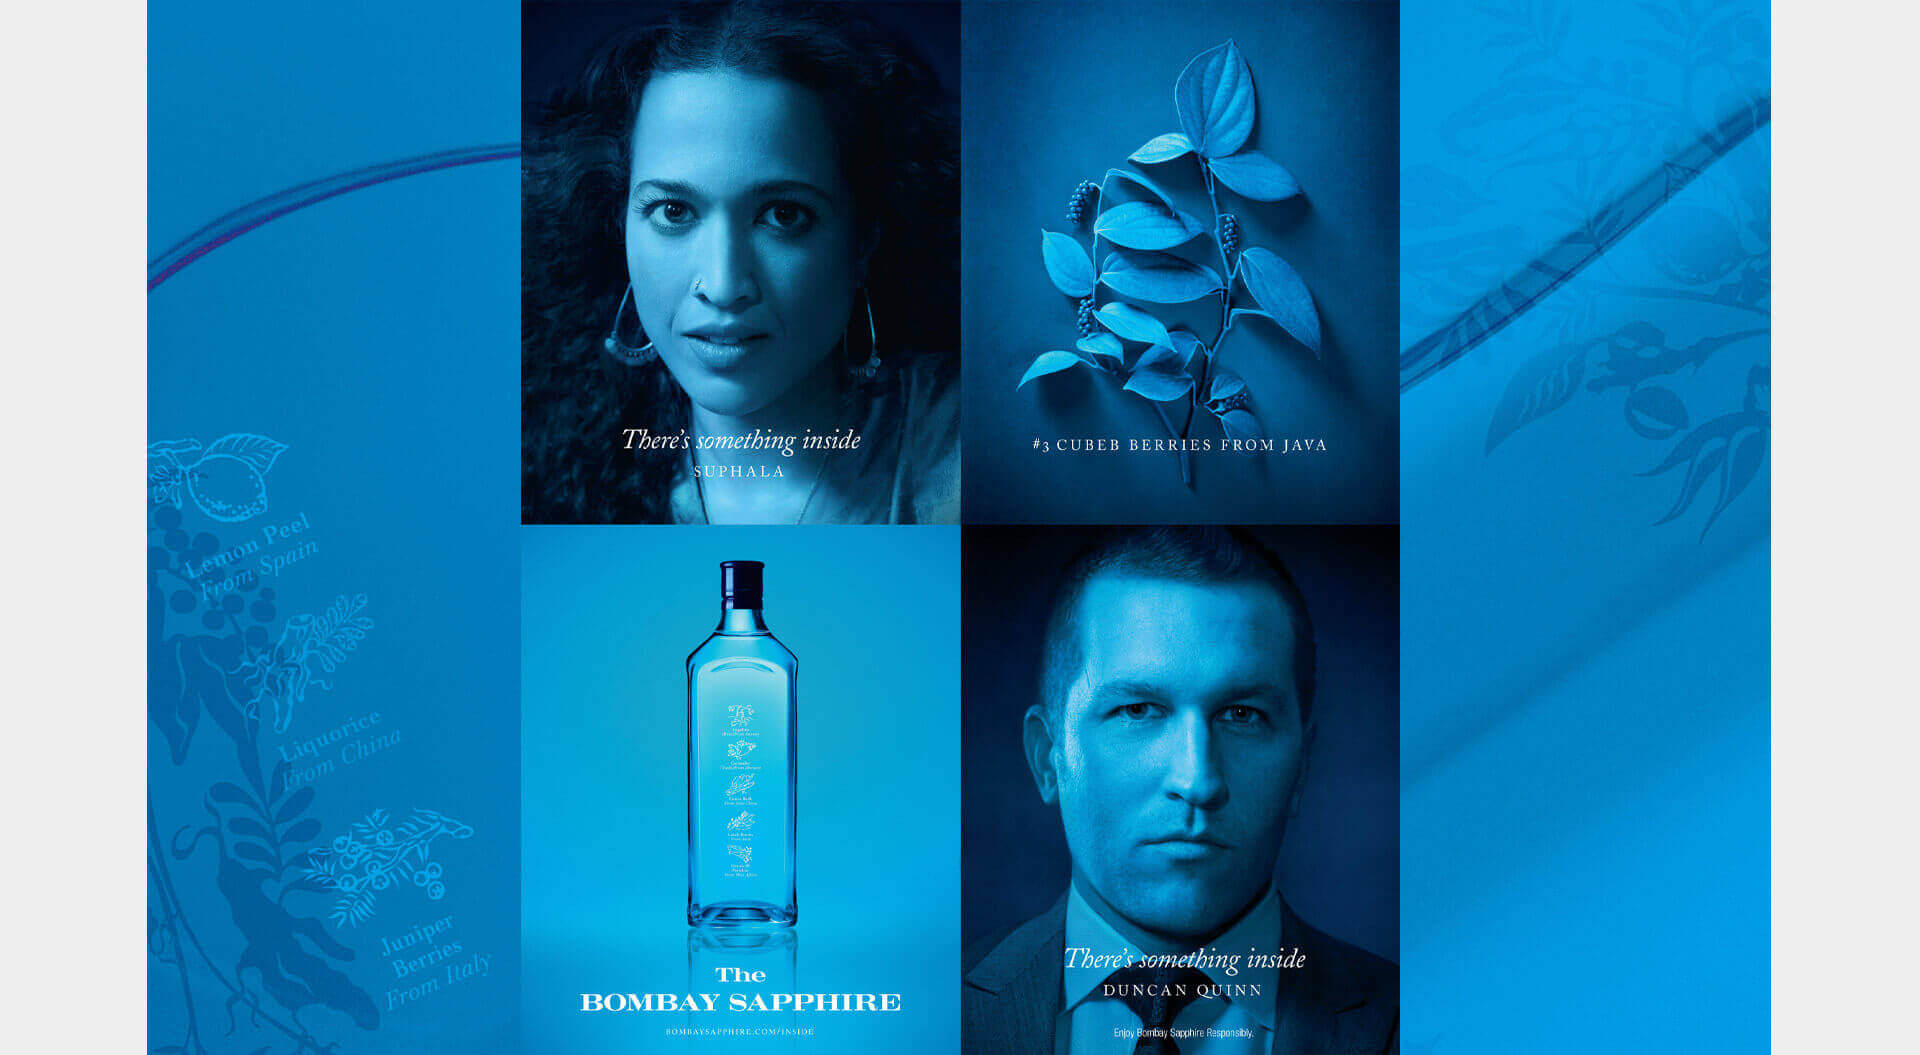 Spirits industry promotion campaigns travel retail, strategy marketing, retail design, airports, duty-free alcohol marketing, innovative concepts ideas Bacardi Global Travel Retail, brand Bombay Sapphire